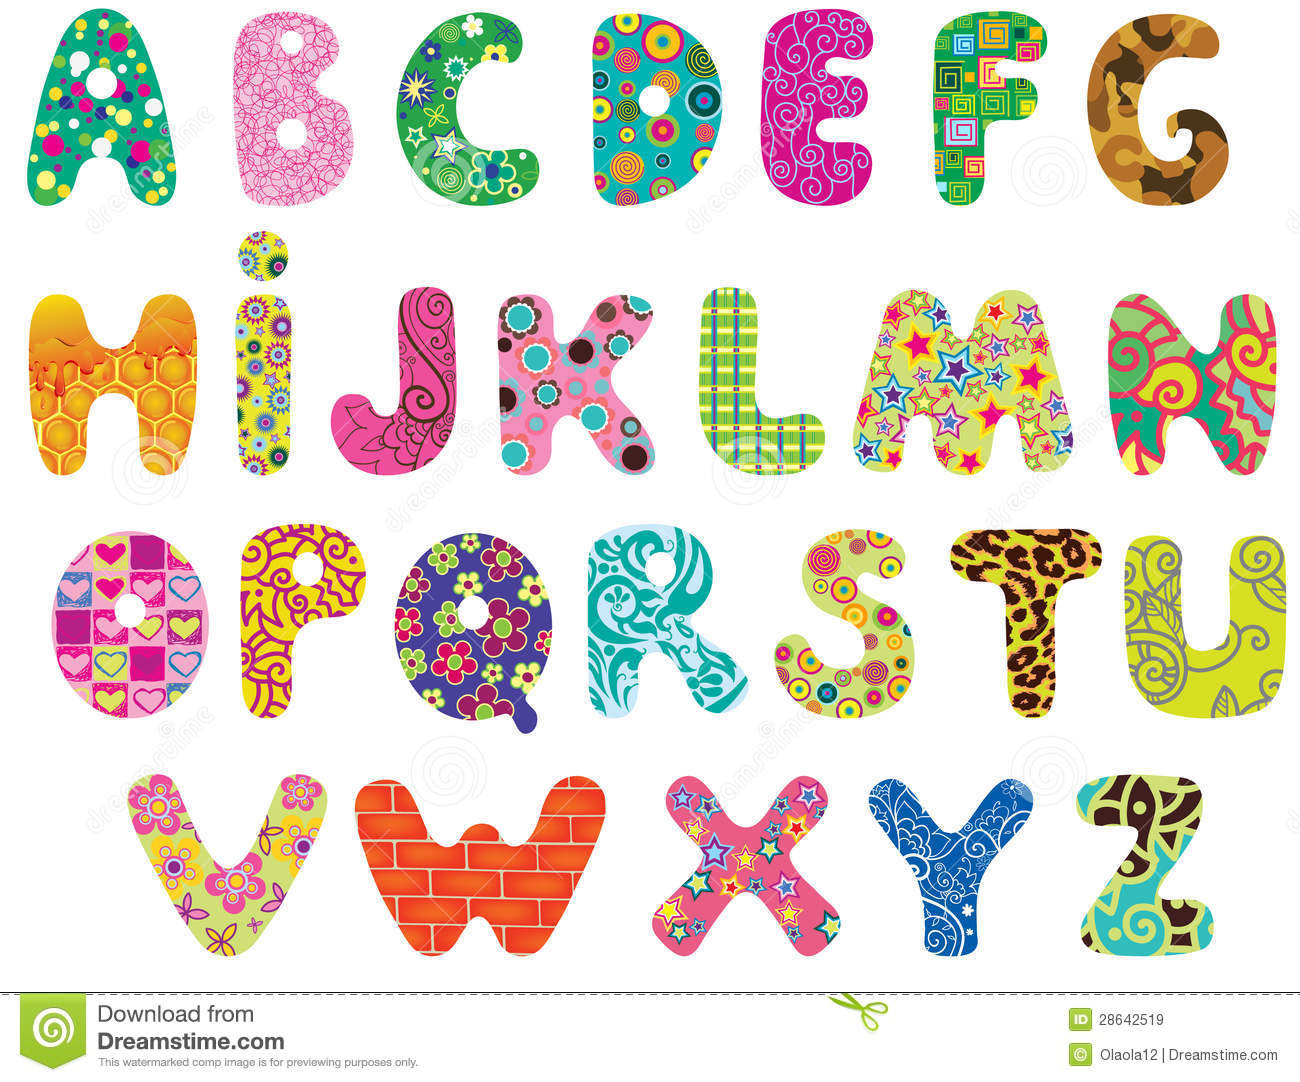 Best Images Of Cute Alphabet Letters Printable Cute Alphabet Letters Clip Art Alphabet